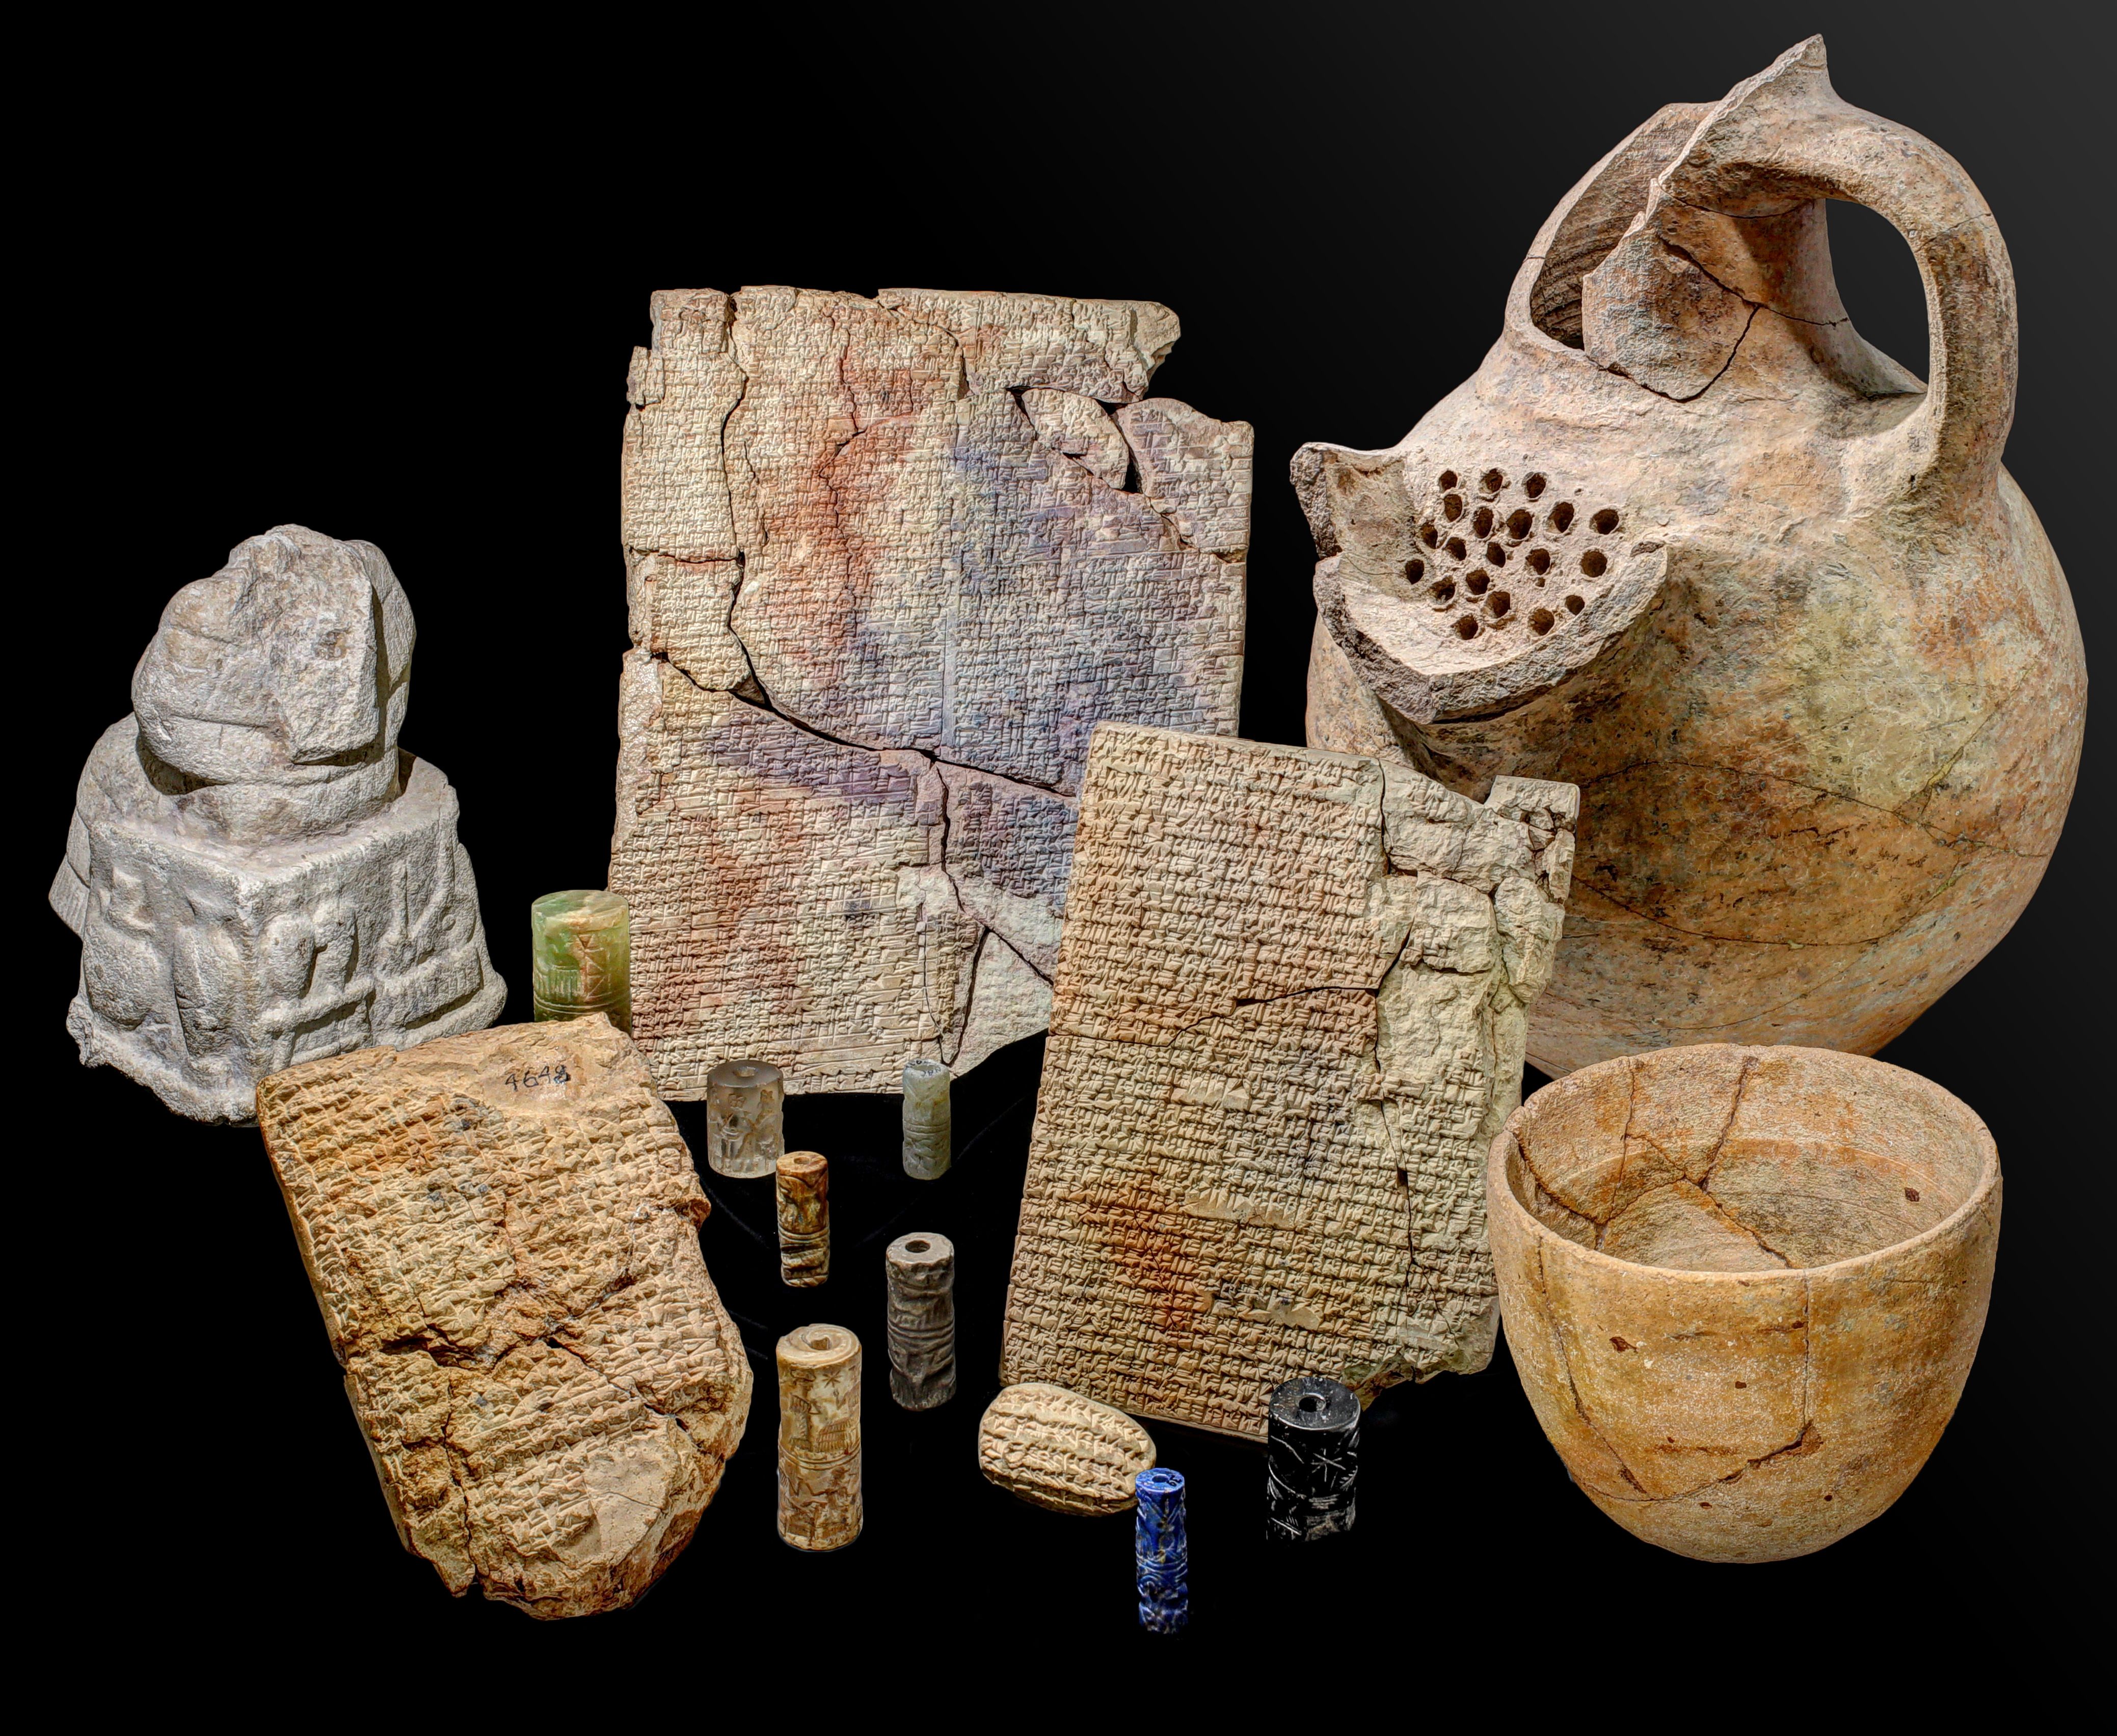 Ceramic cooking pots record history of ancient food practices